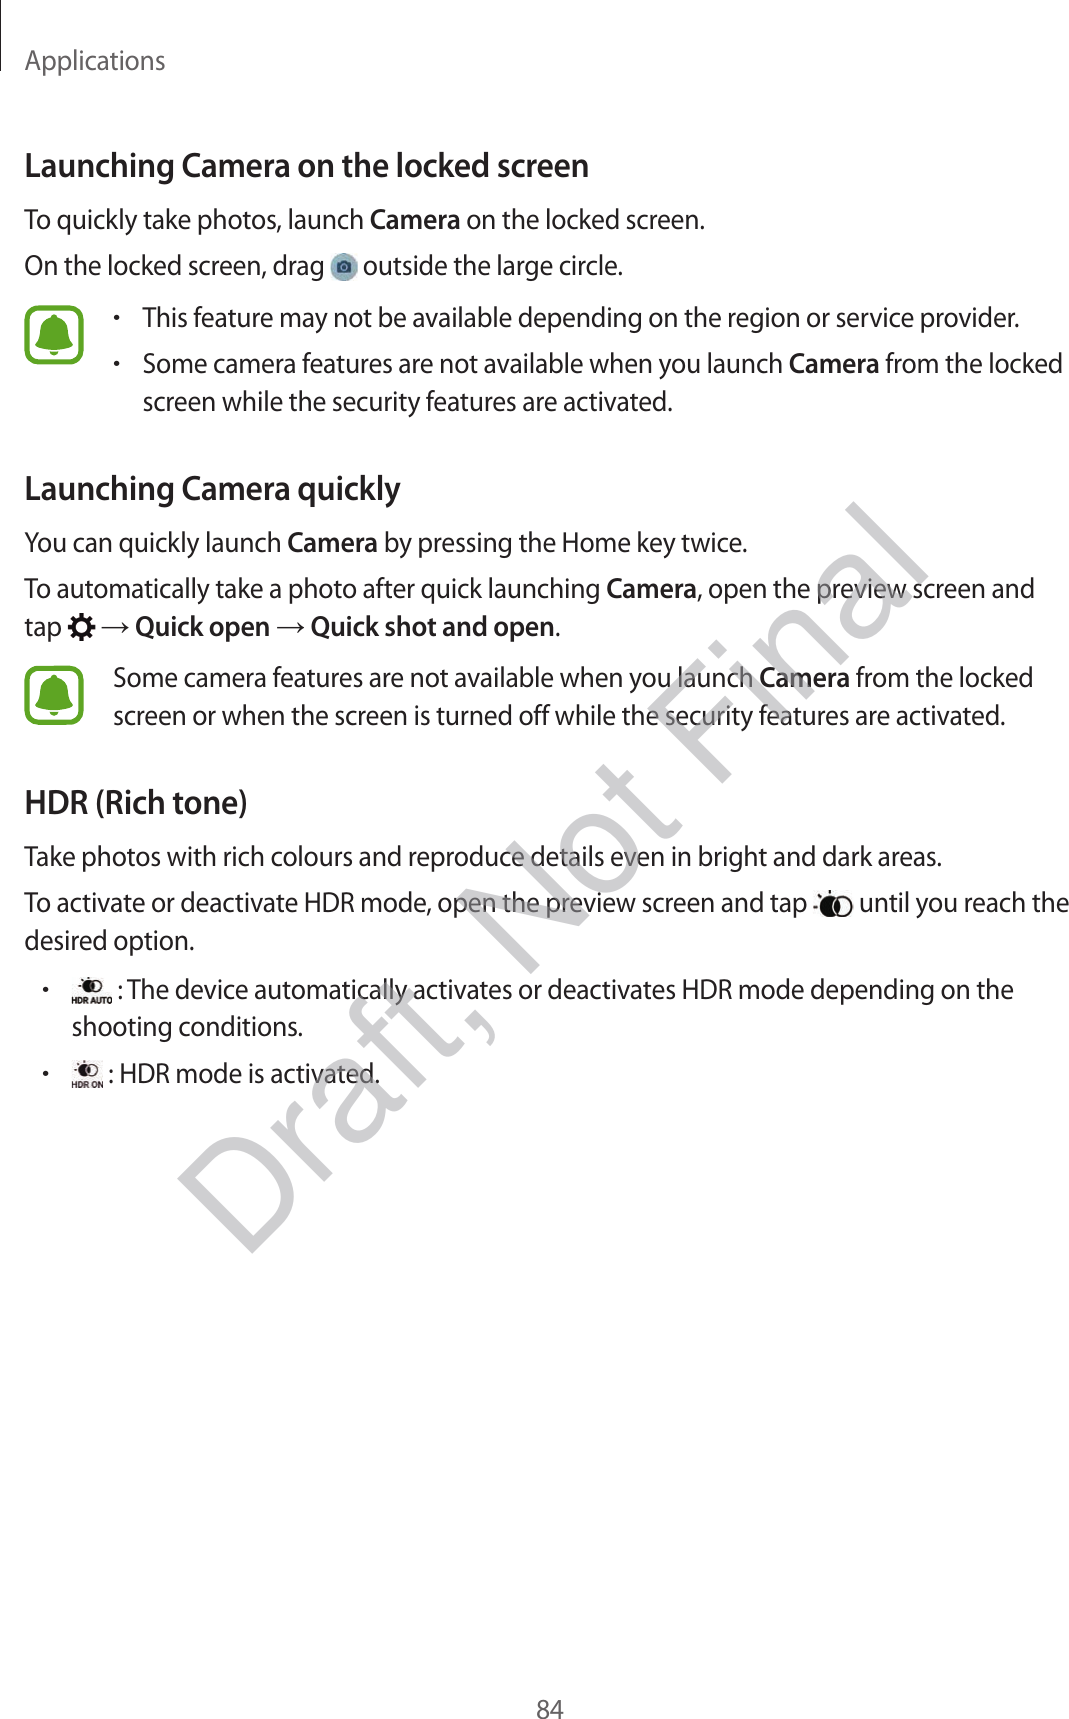 Applications84Launching Camera on the locked screenTo quickly take photos, launch Camera on the locked screen.On the locked screen, drag   outside the large circle.•This feature may not be available depending on the region or service provider.•Some camera features are not available when you launch Camera from the locked screen while the security features are activated.Launching Camera quicklyYou can quickly launch Camera by pressing the Home key twice.To automatically take a photo after quick launching Camera, open the preview screen and tap    Quick open  Quick shot and open.Some camera features are not available when you launch Camera from the locked screen or when the screen is turned off while the security features are activated.HDR (Rich tone)Take photos with rich colours and reproduce details even in bright and dark areas.To activate or deactivate HDR mode, open the preview screen and tap   until you reach the desired option.• : The device automatically activates or deactivates HDR mode depending on the shooting conditions.• : HDR mode is activated.Draft, Not Final